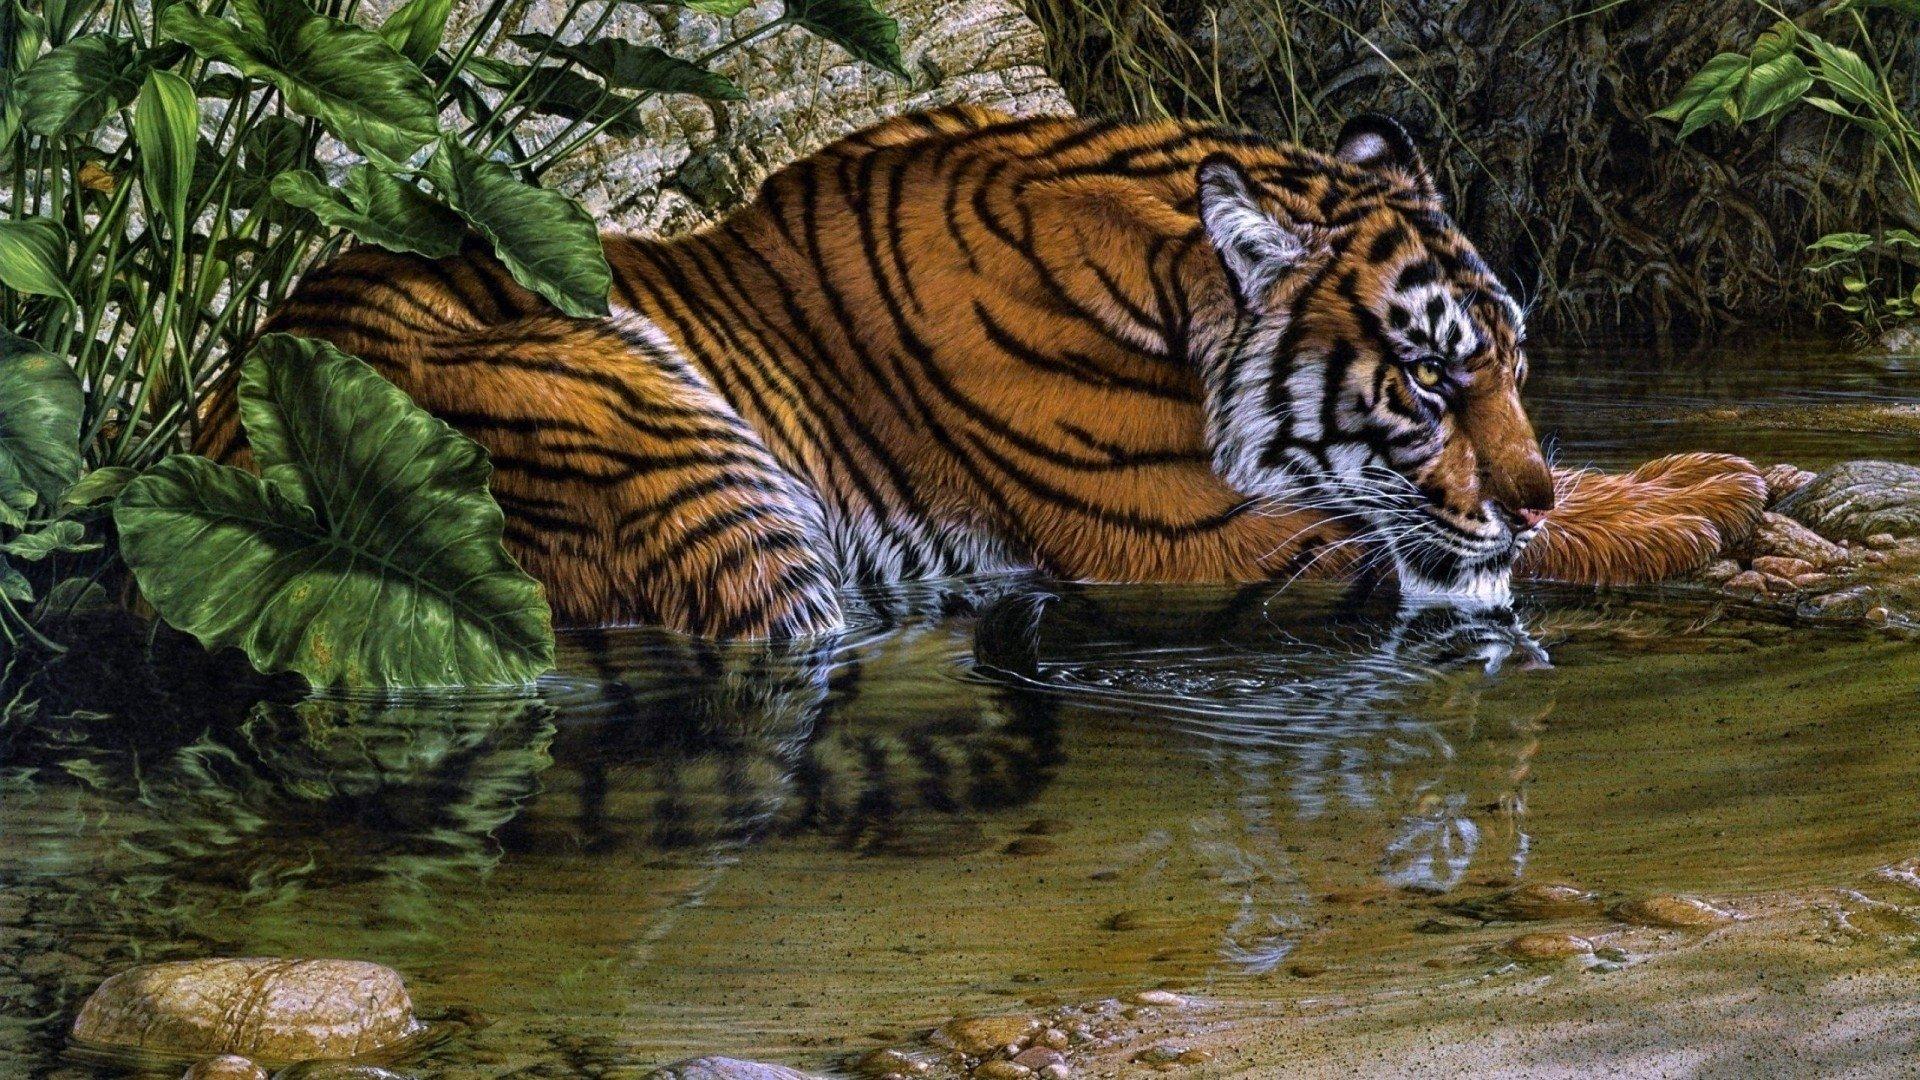 Painting of a Tiger HD Wallpaper